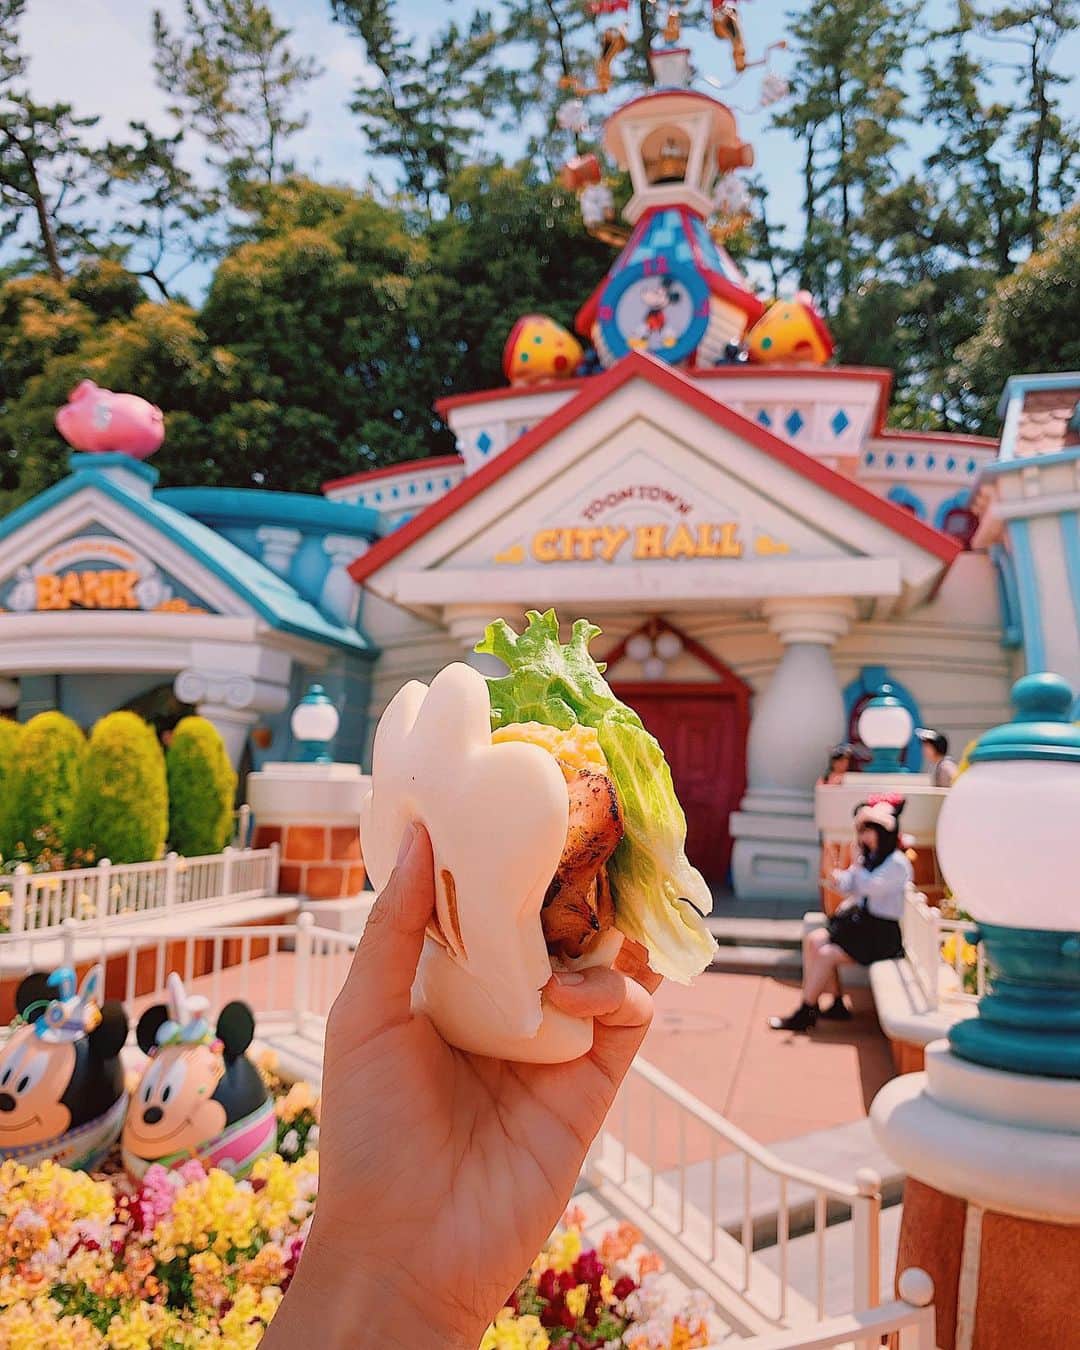 Girleatworldのインスタグラム：「Yet another item I squealed when I saw it in person at Tokyo Disneyland. On the menu, it's pretty average-sounding: A grilled chicken and scrambled eggs sandwich. The kicker? It's served inside a Chinese bun that is perfectly shaped like Mickey Mouse's gloves! You can get this sandwich at Huey, Dewey and Louie’s Good Time Cafe in Toontown.  The food in Tokyo Disneyland kicks major ass in SO many ways – The reasonable price, the delicious taste, and the super creative concept! I really appreciate the folks at Tokyo Disneyland for making food such a delightful experience.  I've written a blog post on how to maximize your visit to Tokyo Disneyland. See the link on my profile!  #girleatworld #shotoniphone #iphonexsmax #disneyland #tokyo #tokyodisneyland #tokyodisneylandfood #mickeymouse #toontown #toocutetoeat #tokyodisneyresort」